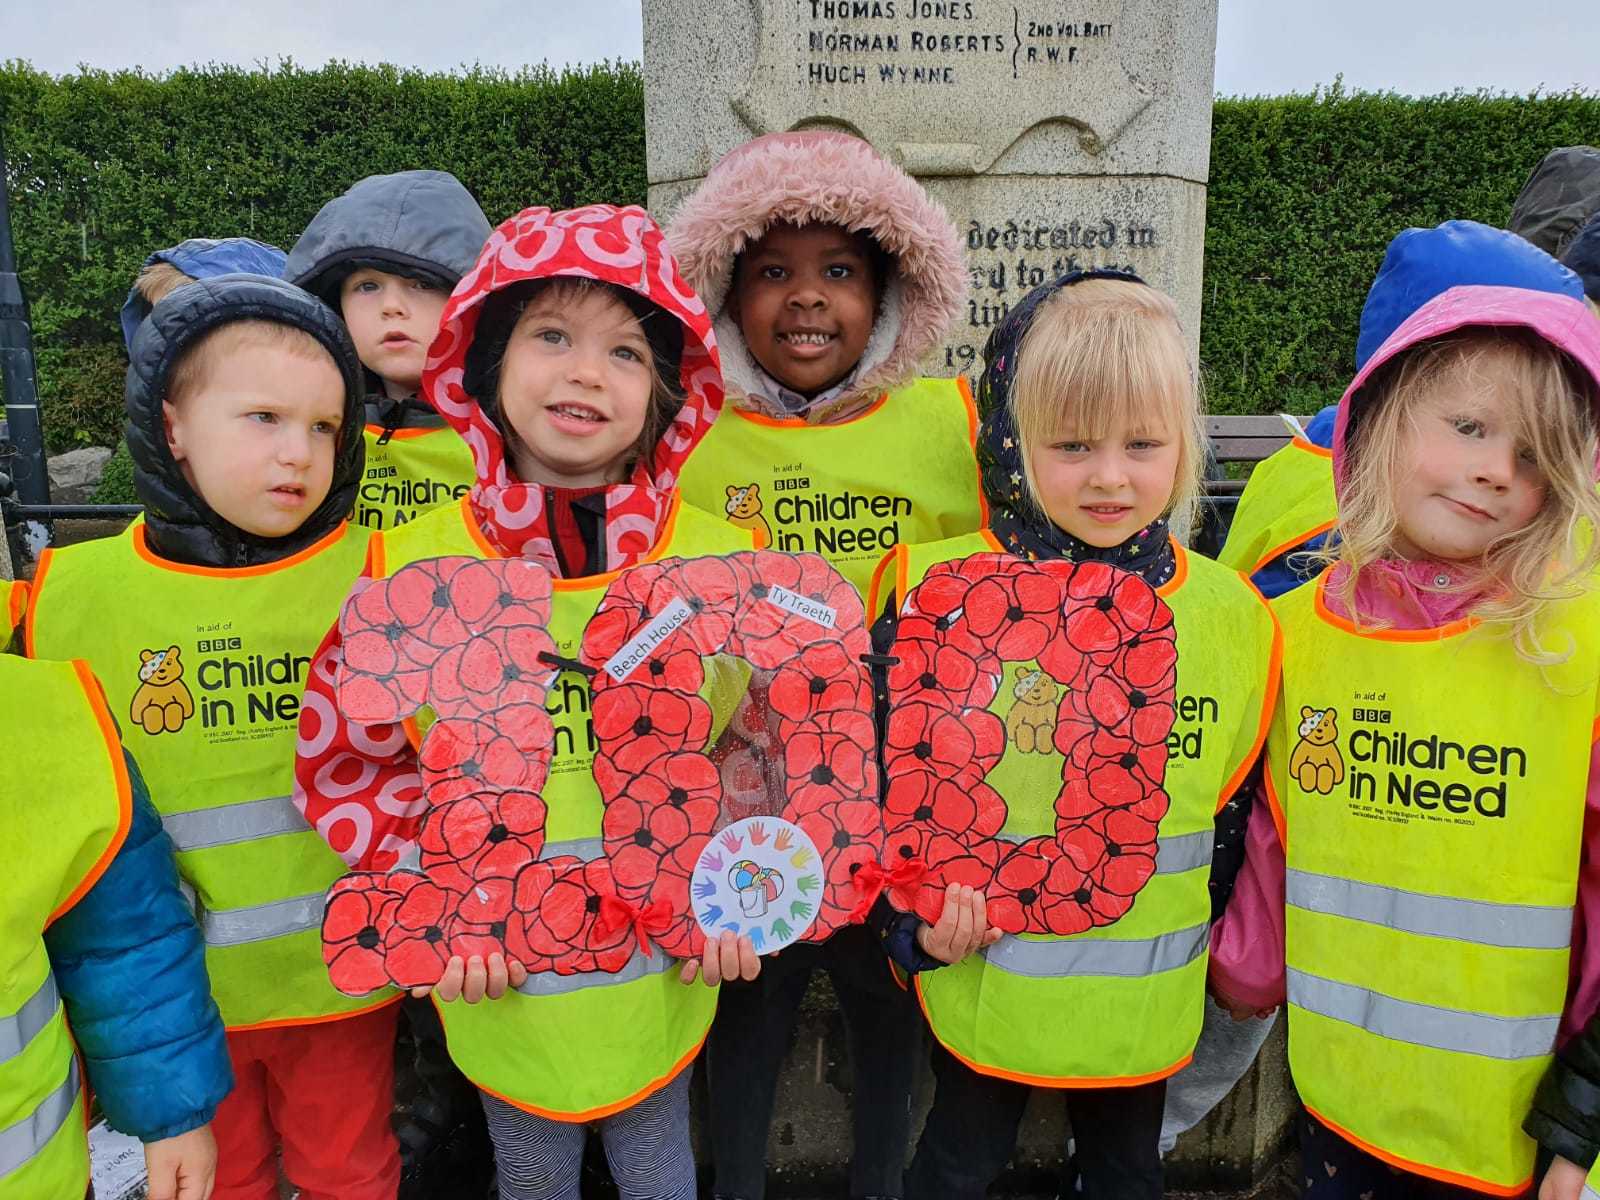 The children went to the cenotaph to place a wreath.